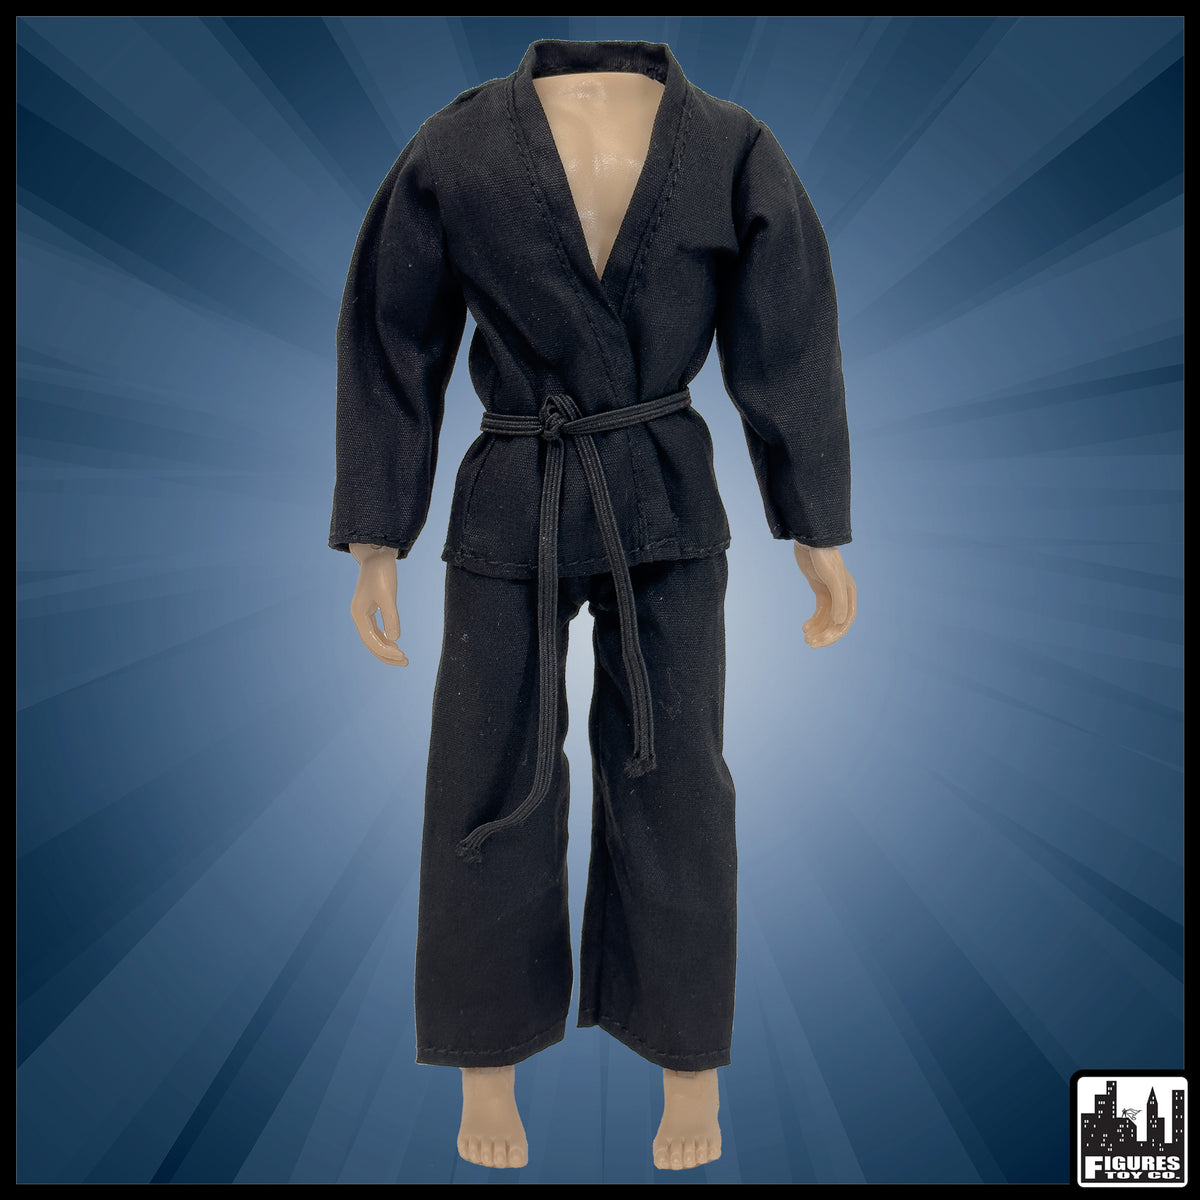 Karate Outfit for WWE Wrestling Action Figures